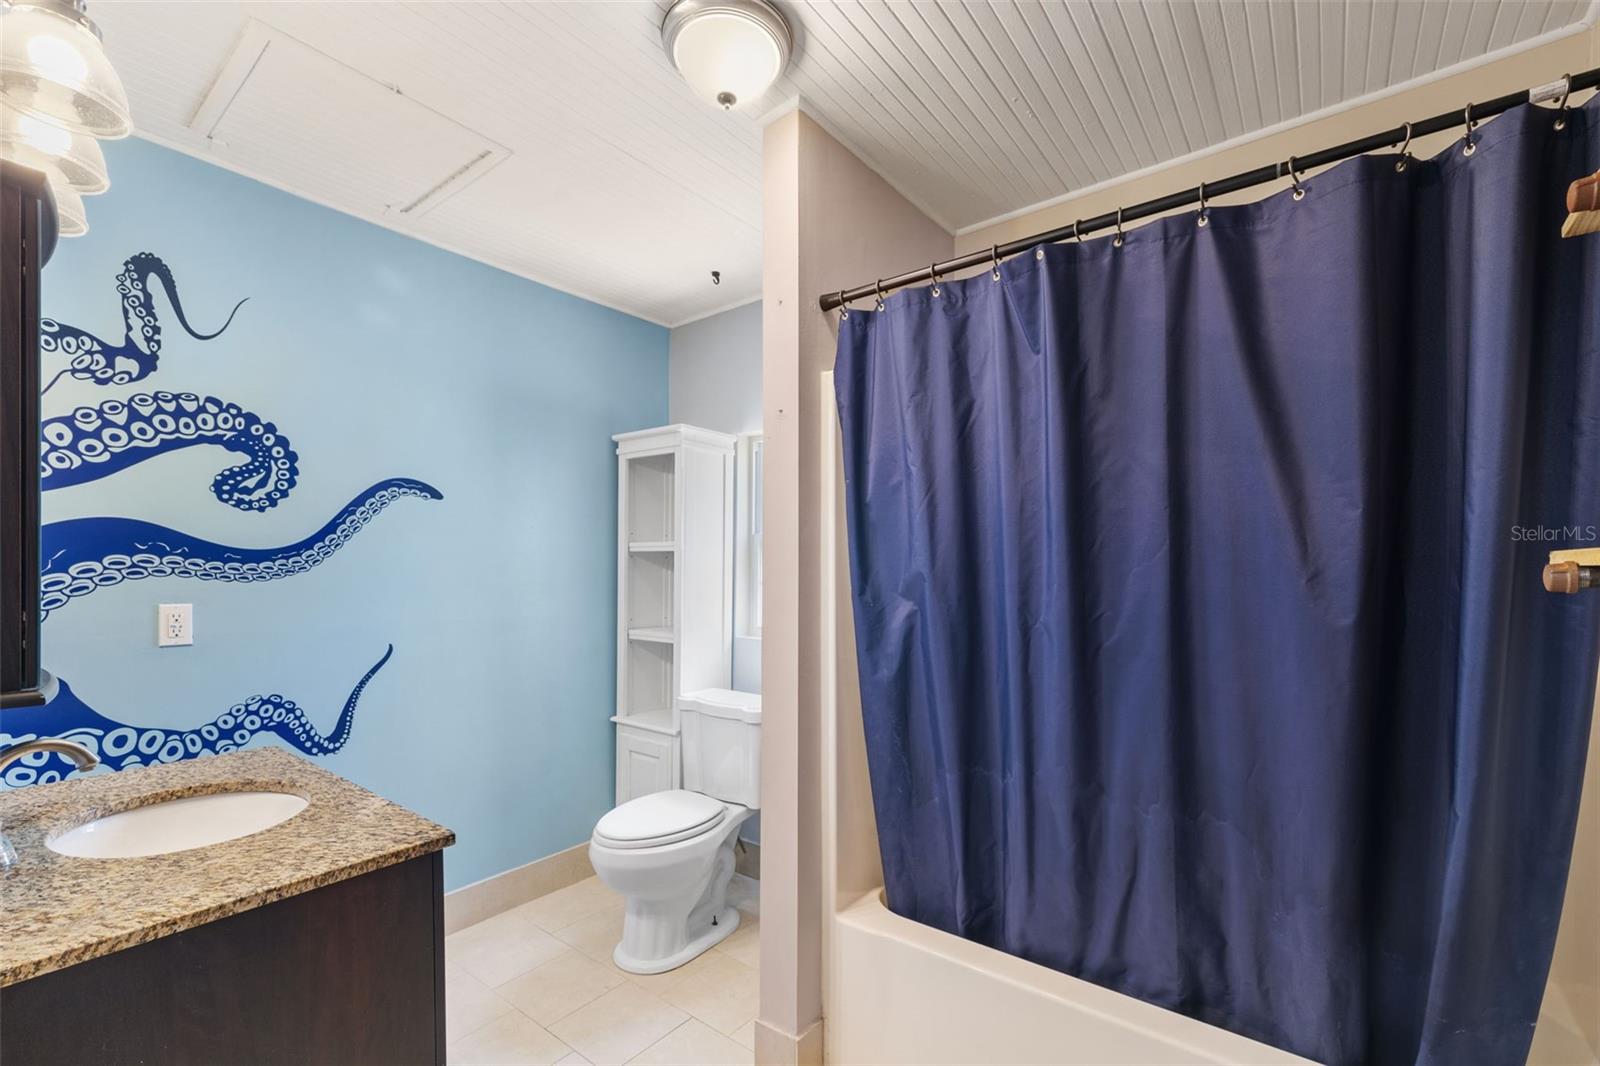 Ensuite bathroom with removable octopus graphics. (It's just a decal)